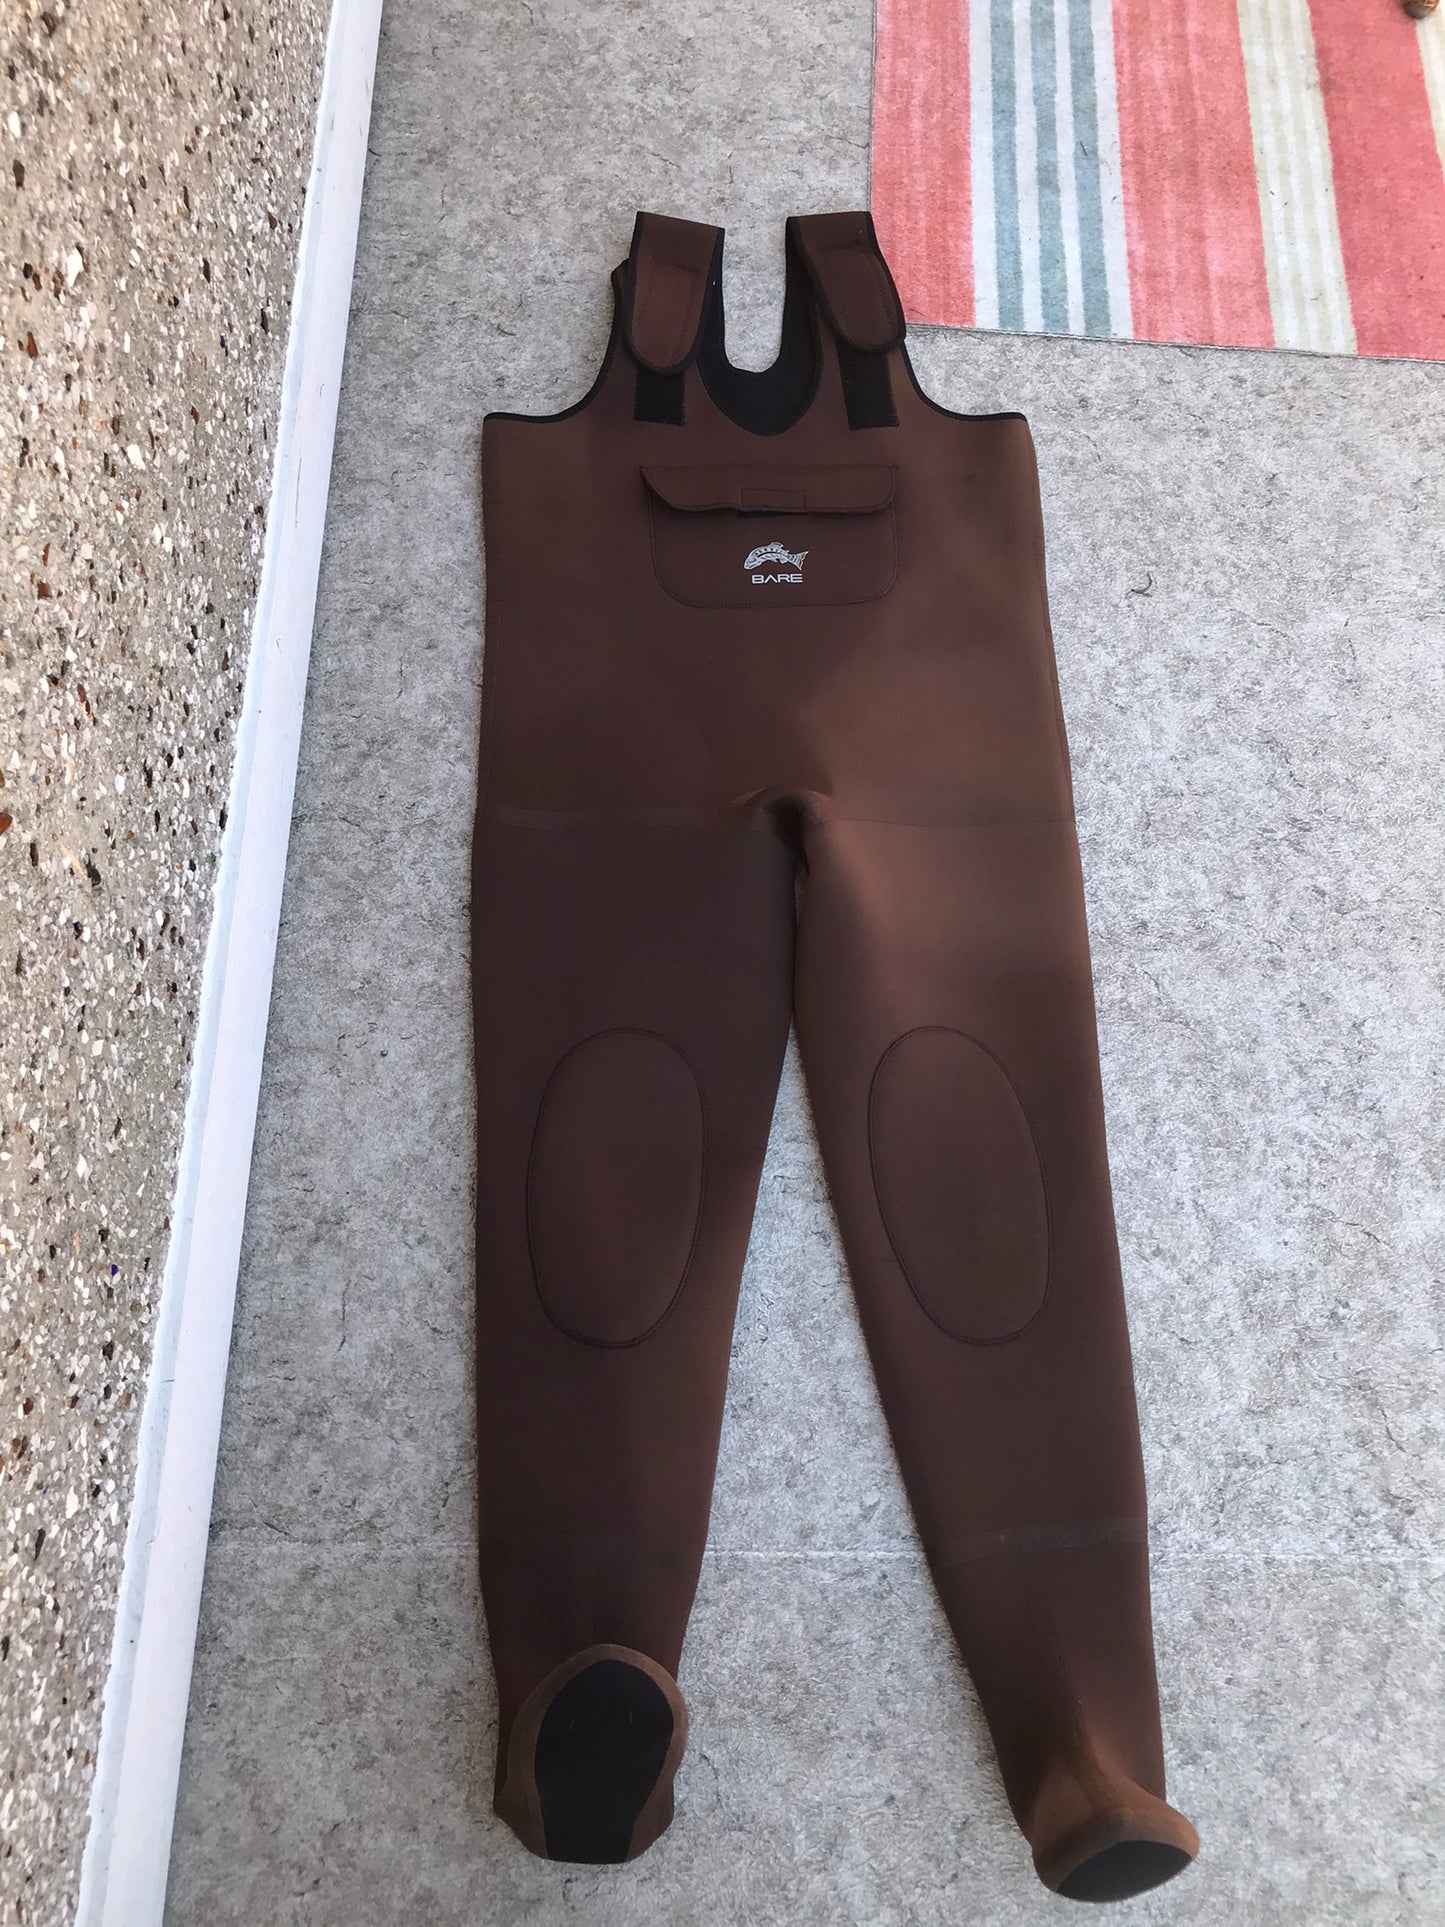 Fishing Adventures Men's Size Large Bare Fishing Waders with Foot Size 11  Stocking Foot Excellent As New